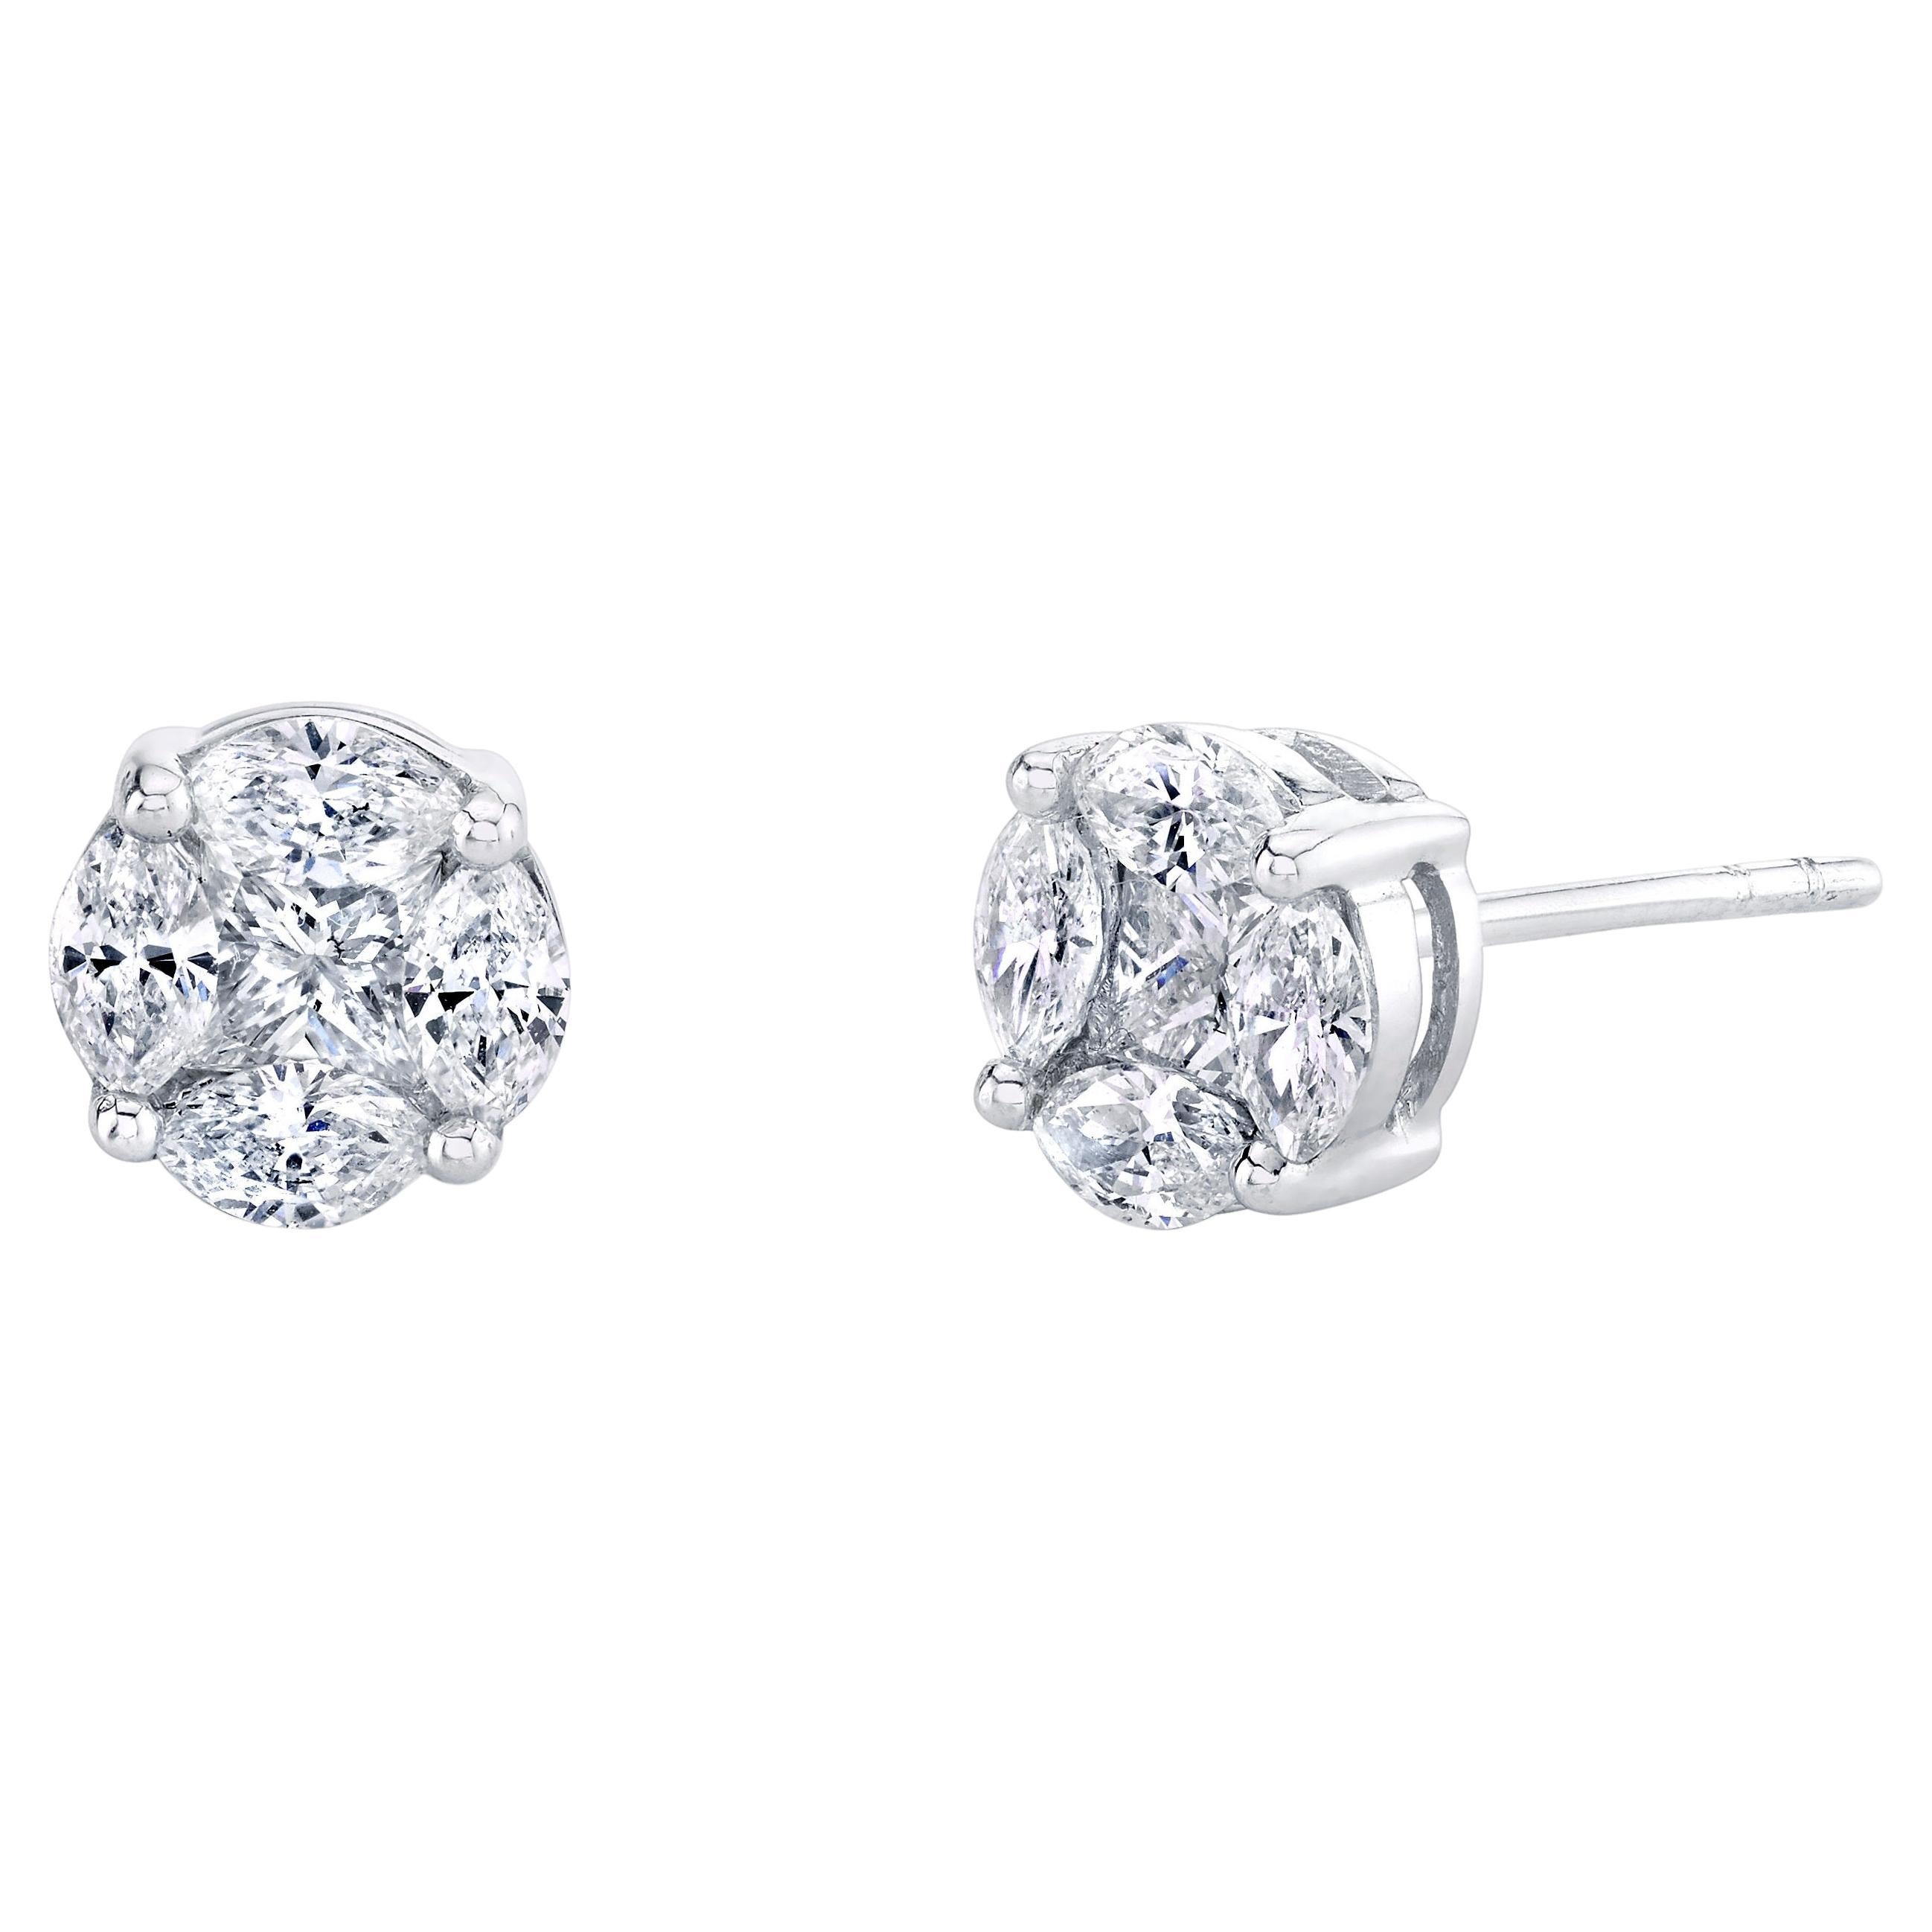 Diamond Illusion Stud Earrings in White Golds, 78 Carat Total  For Sale